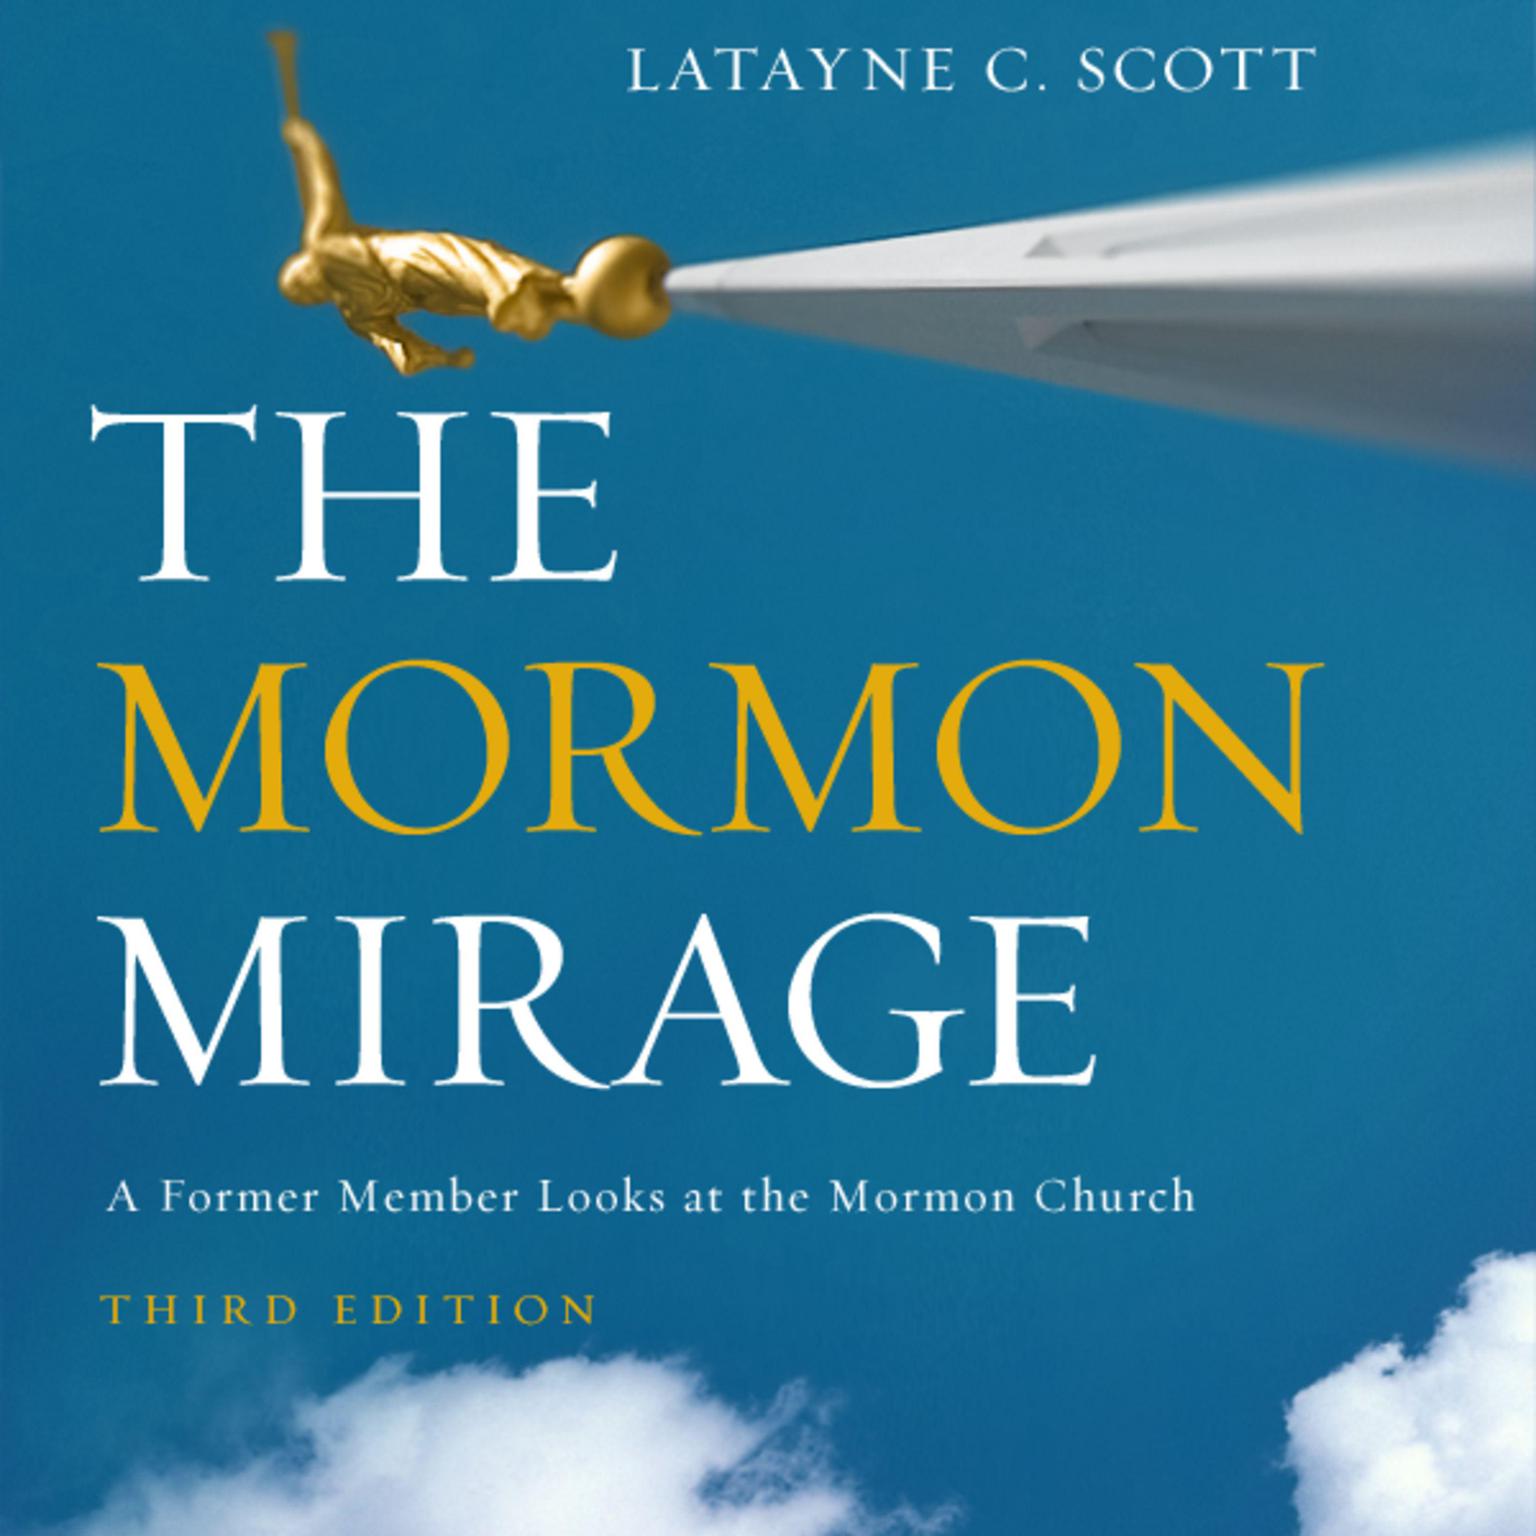 The Mormon Mirage, Third Edition: A Former Member Looks at the Mormon Church Audiobook, by Latayne C. Scott